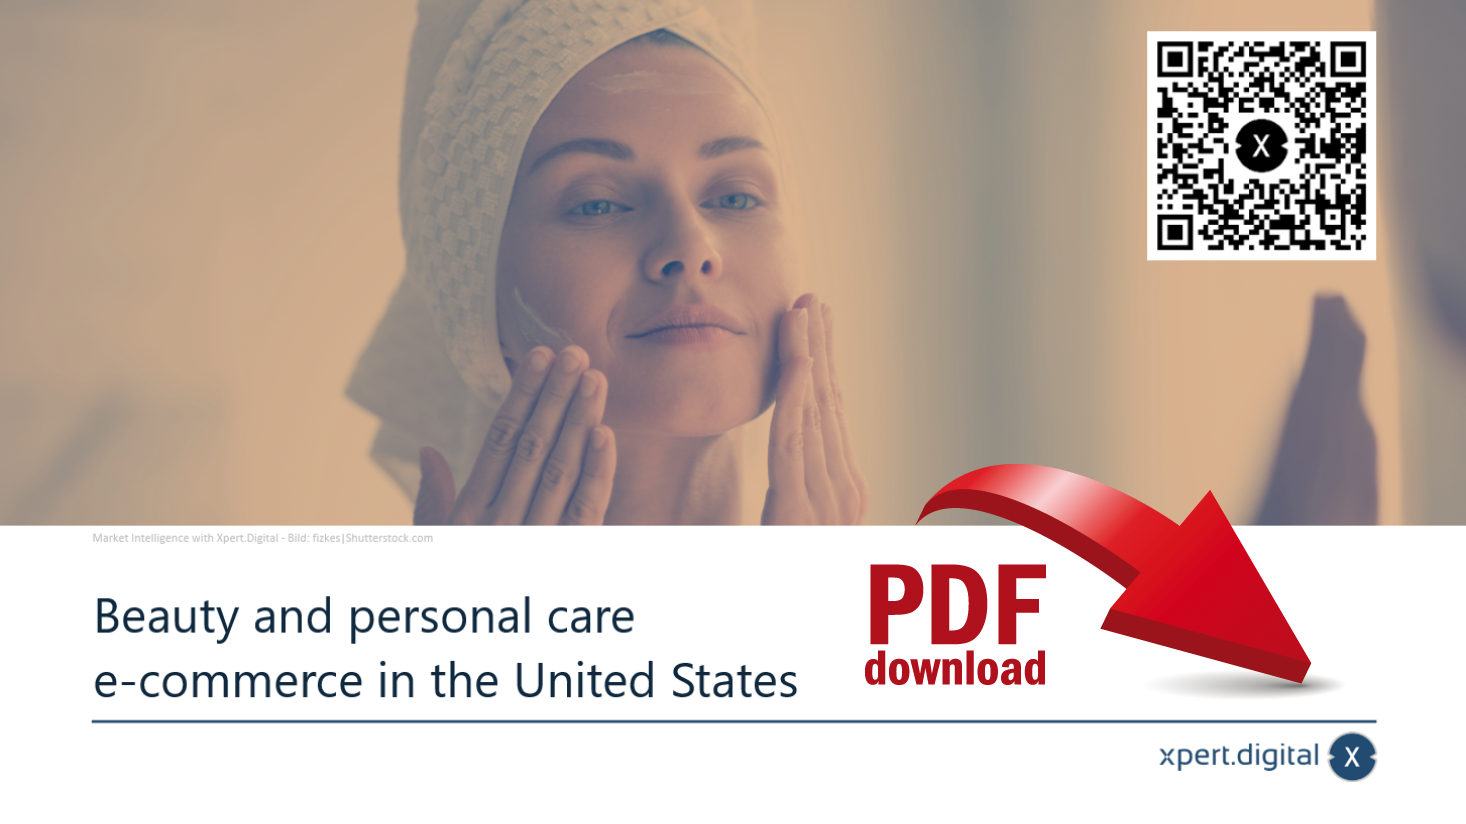 Geschützt: Beauty and personal care e-commerce in the United States